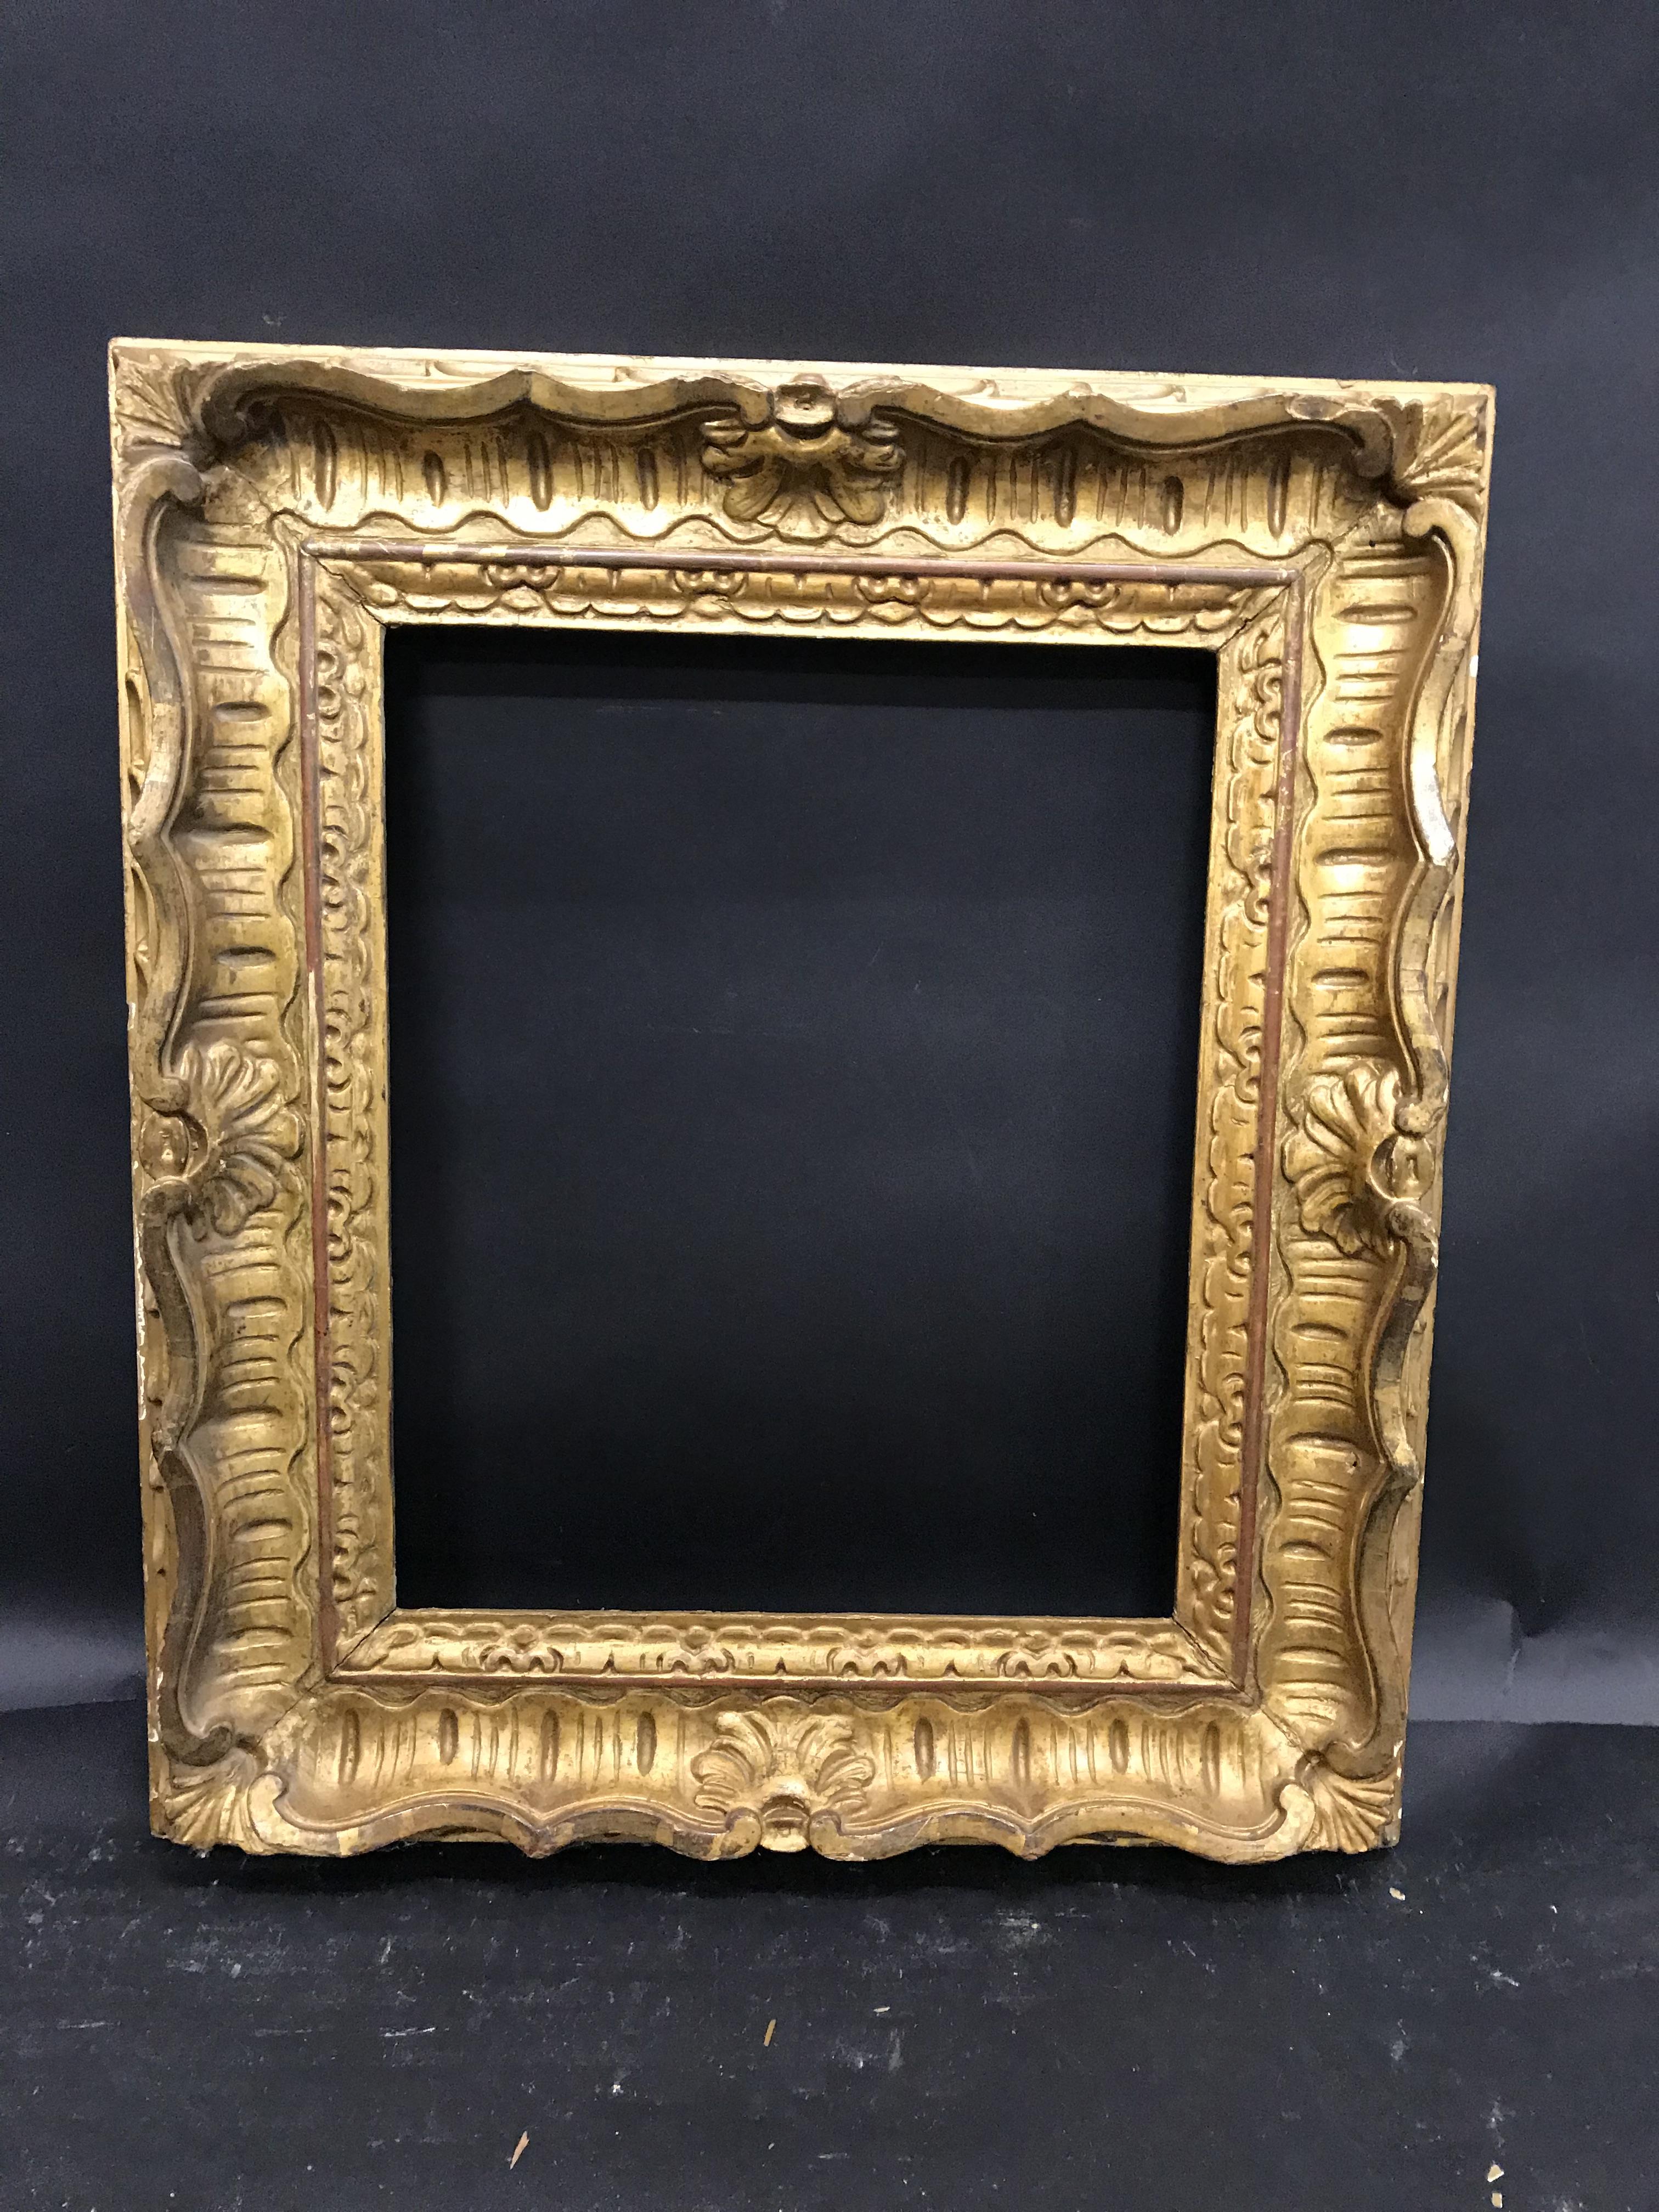 19th Century English School. A Carved Giltwood Frame, 12" x 9.5" (rebate). - Image 2 of 3